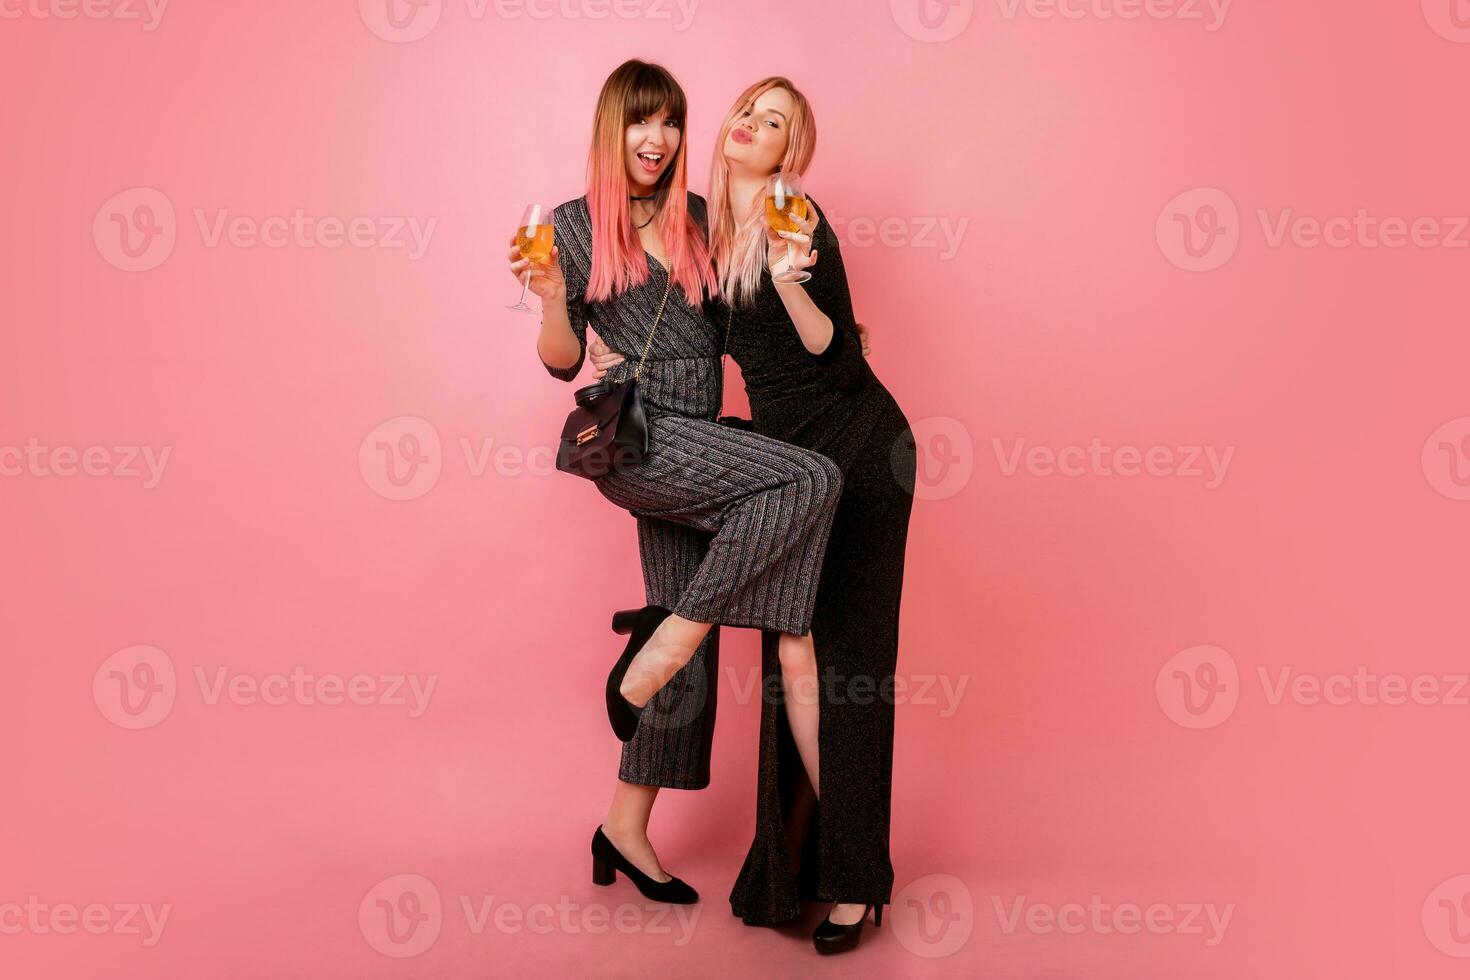 Full length studio  image of celebrating women in party dress drinking shampagne and have great time together. Pink background. Happy emotions. photo